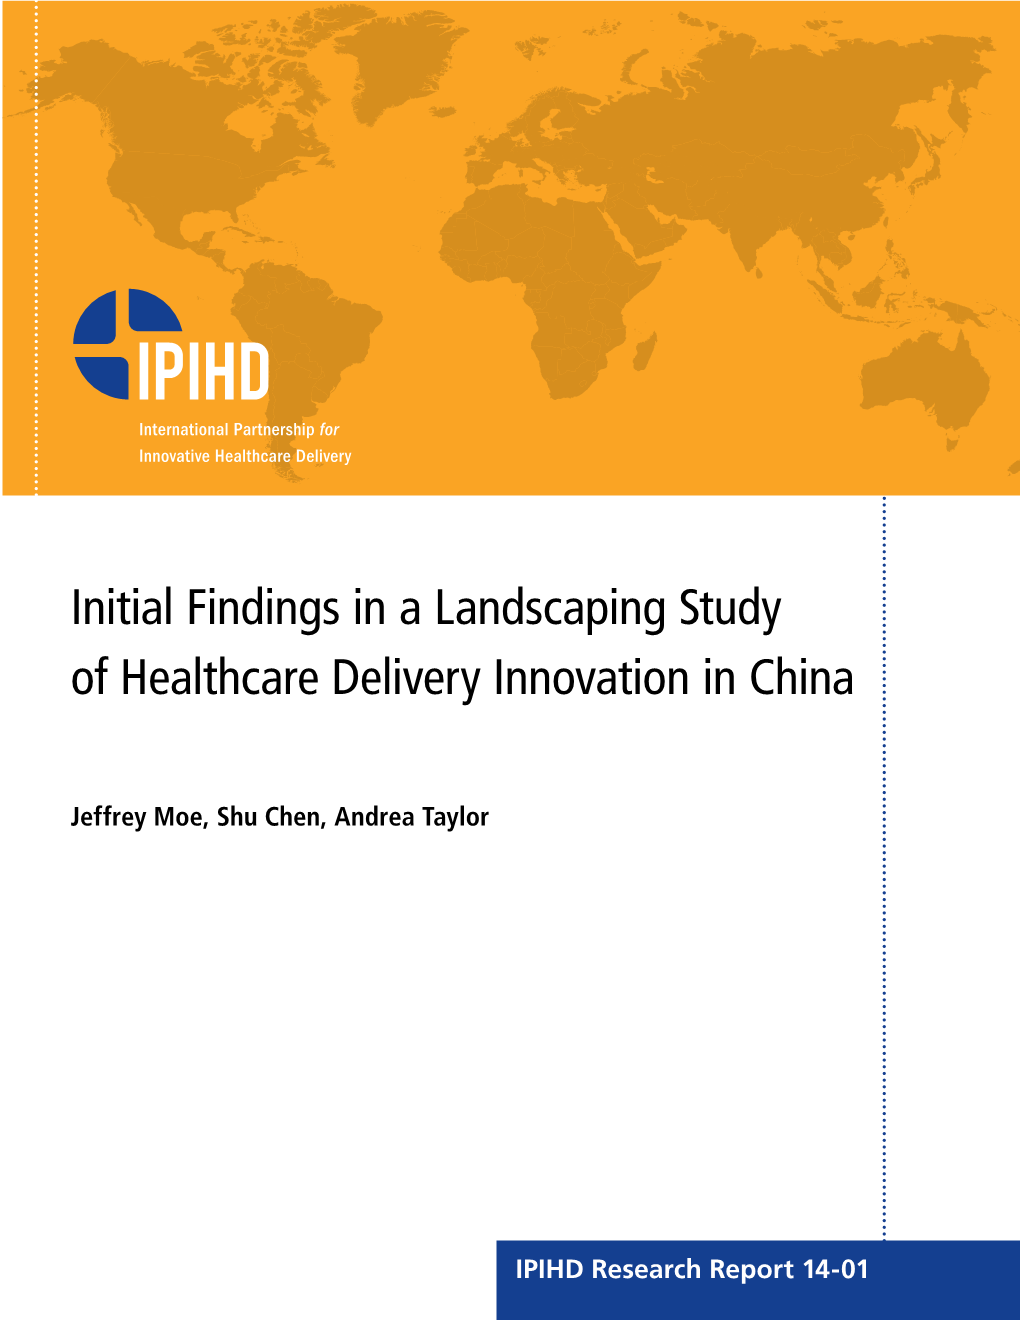 Initial Findings in a Landscaping Study of Healthcare Delivery Innovation in China